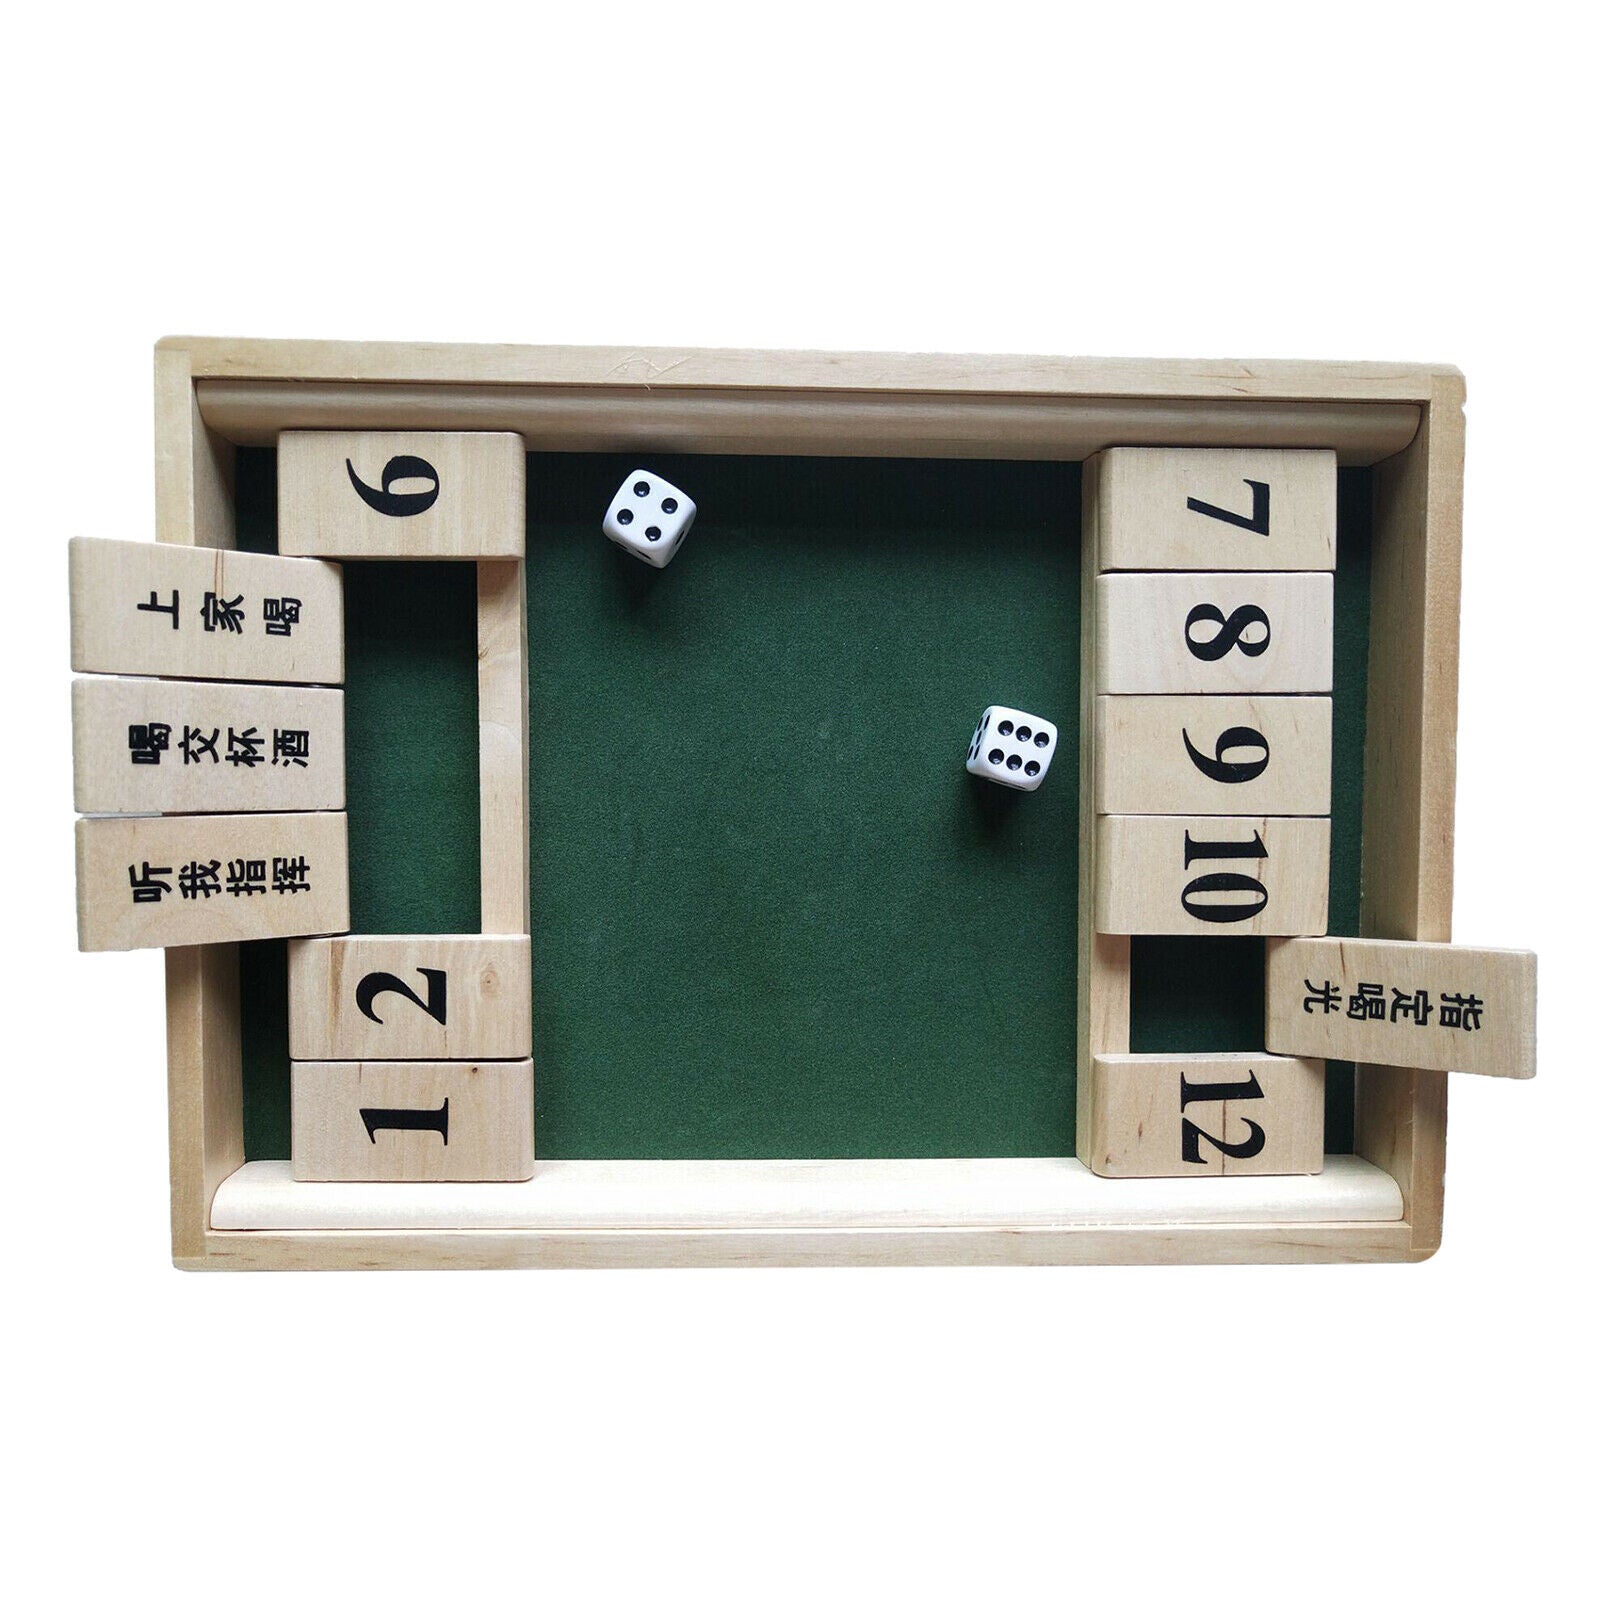 1-2 Players Shut The Box Dice Game,Classic Wooden Board Game with 2 Dice and